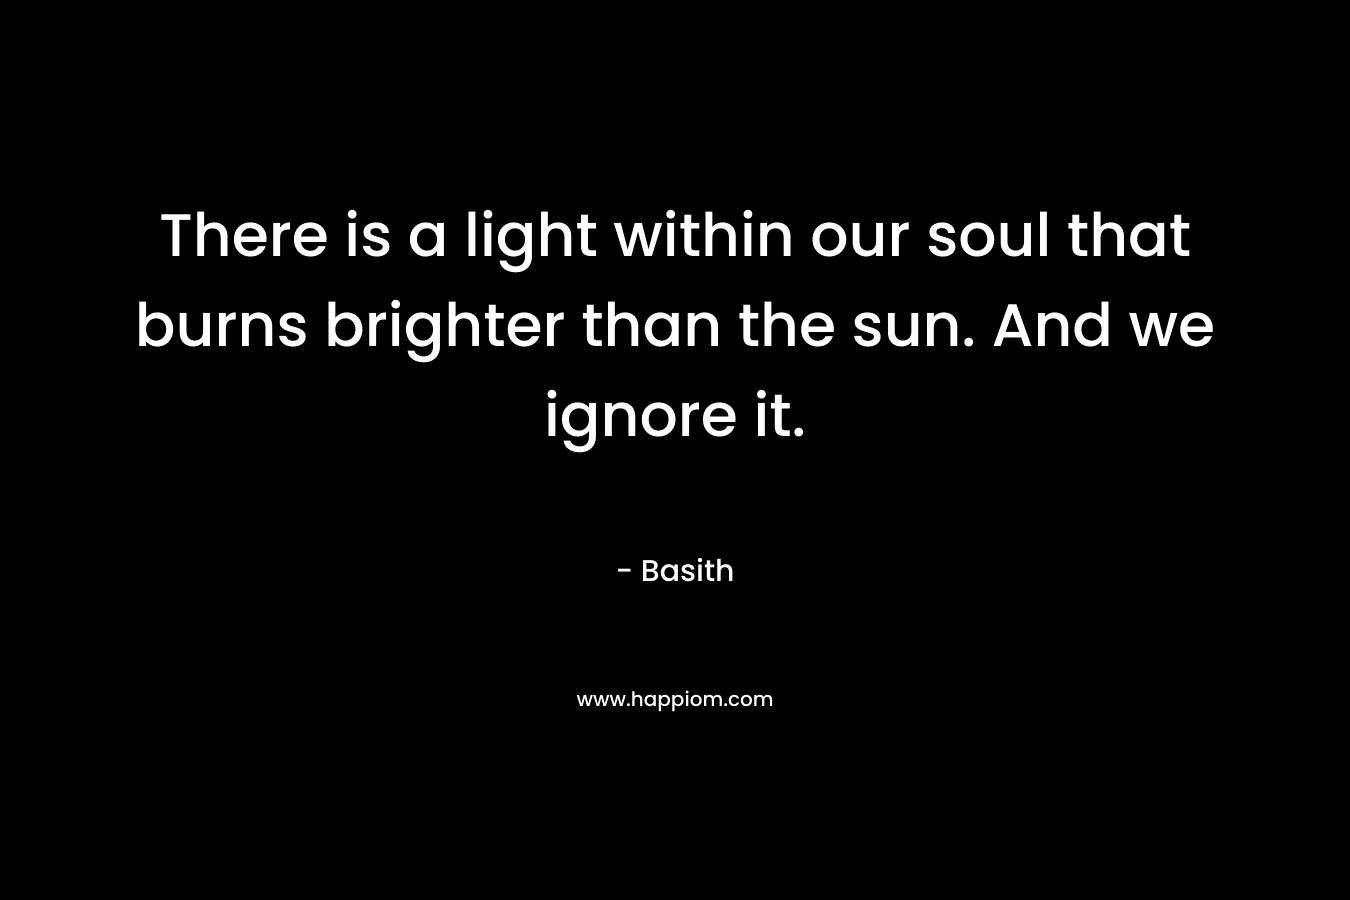 There is a light within our soul that burns brighter than the sun. And we ignore it.